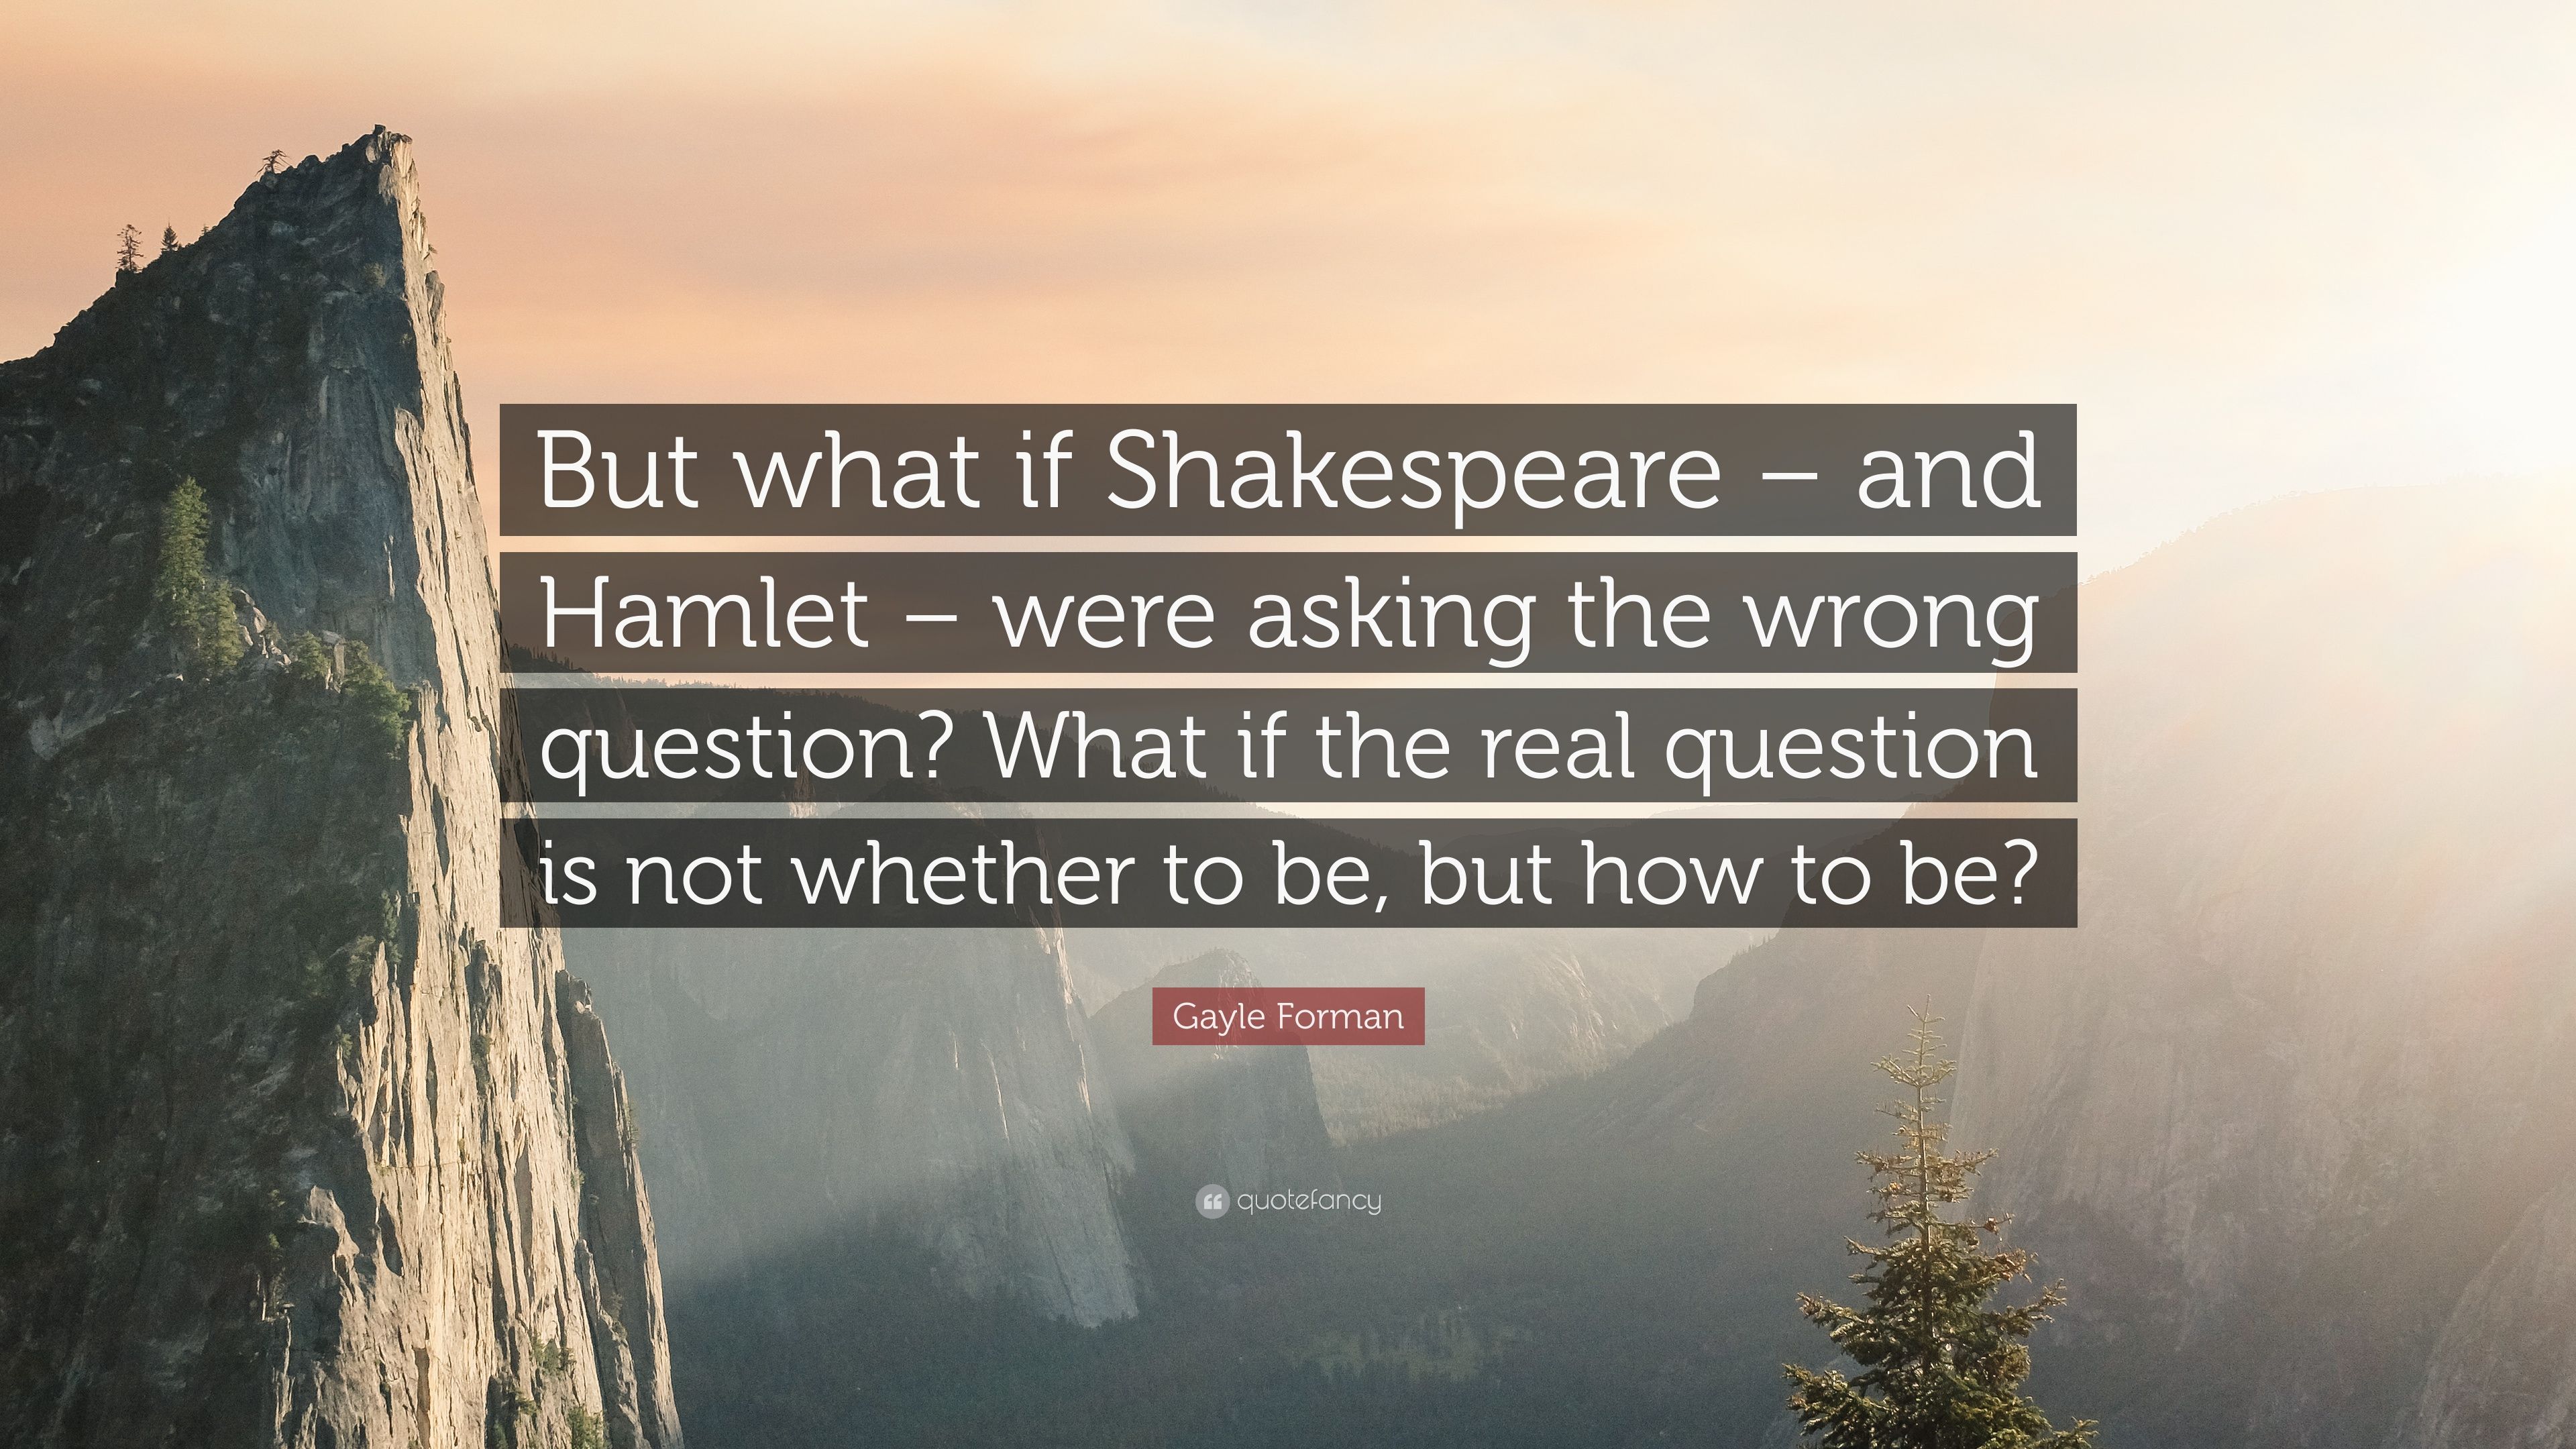 Gayle Forman Quote: “But what if Shakespeare